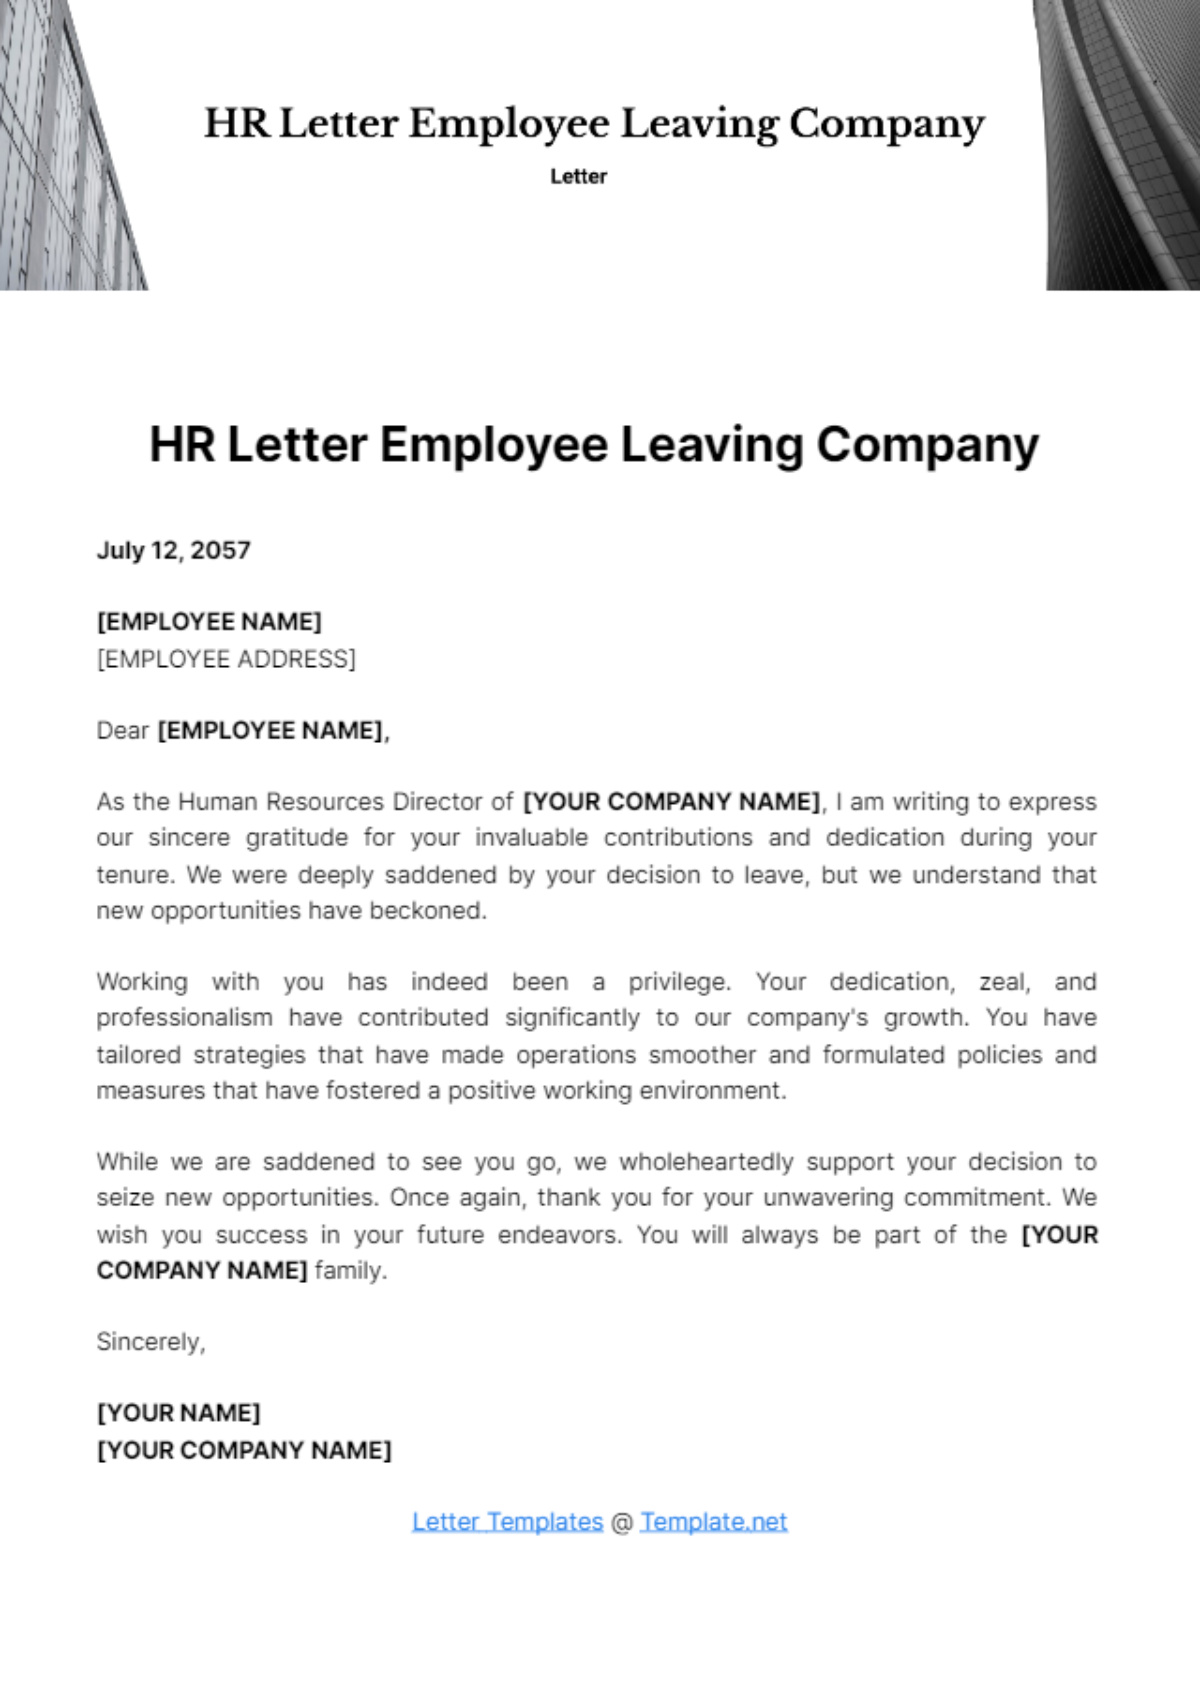 HR Letter Employee Leaving Company Template